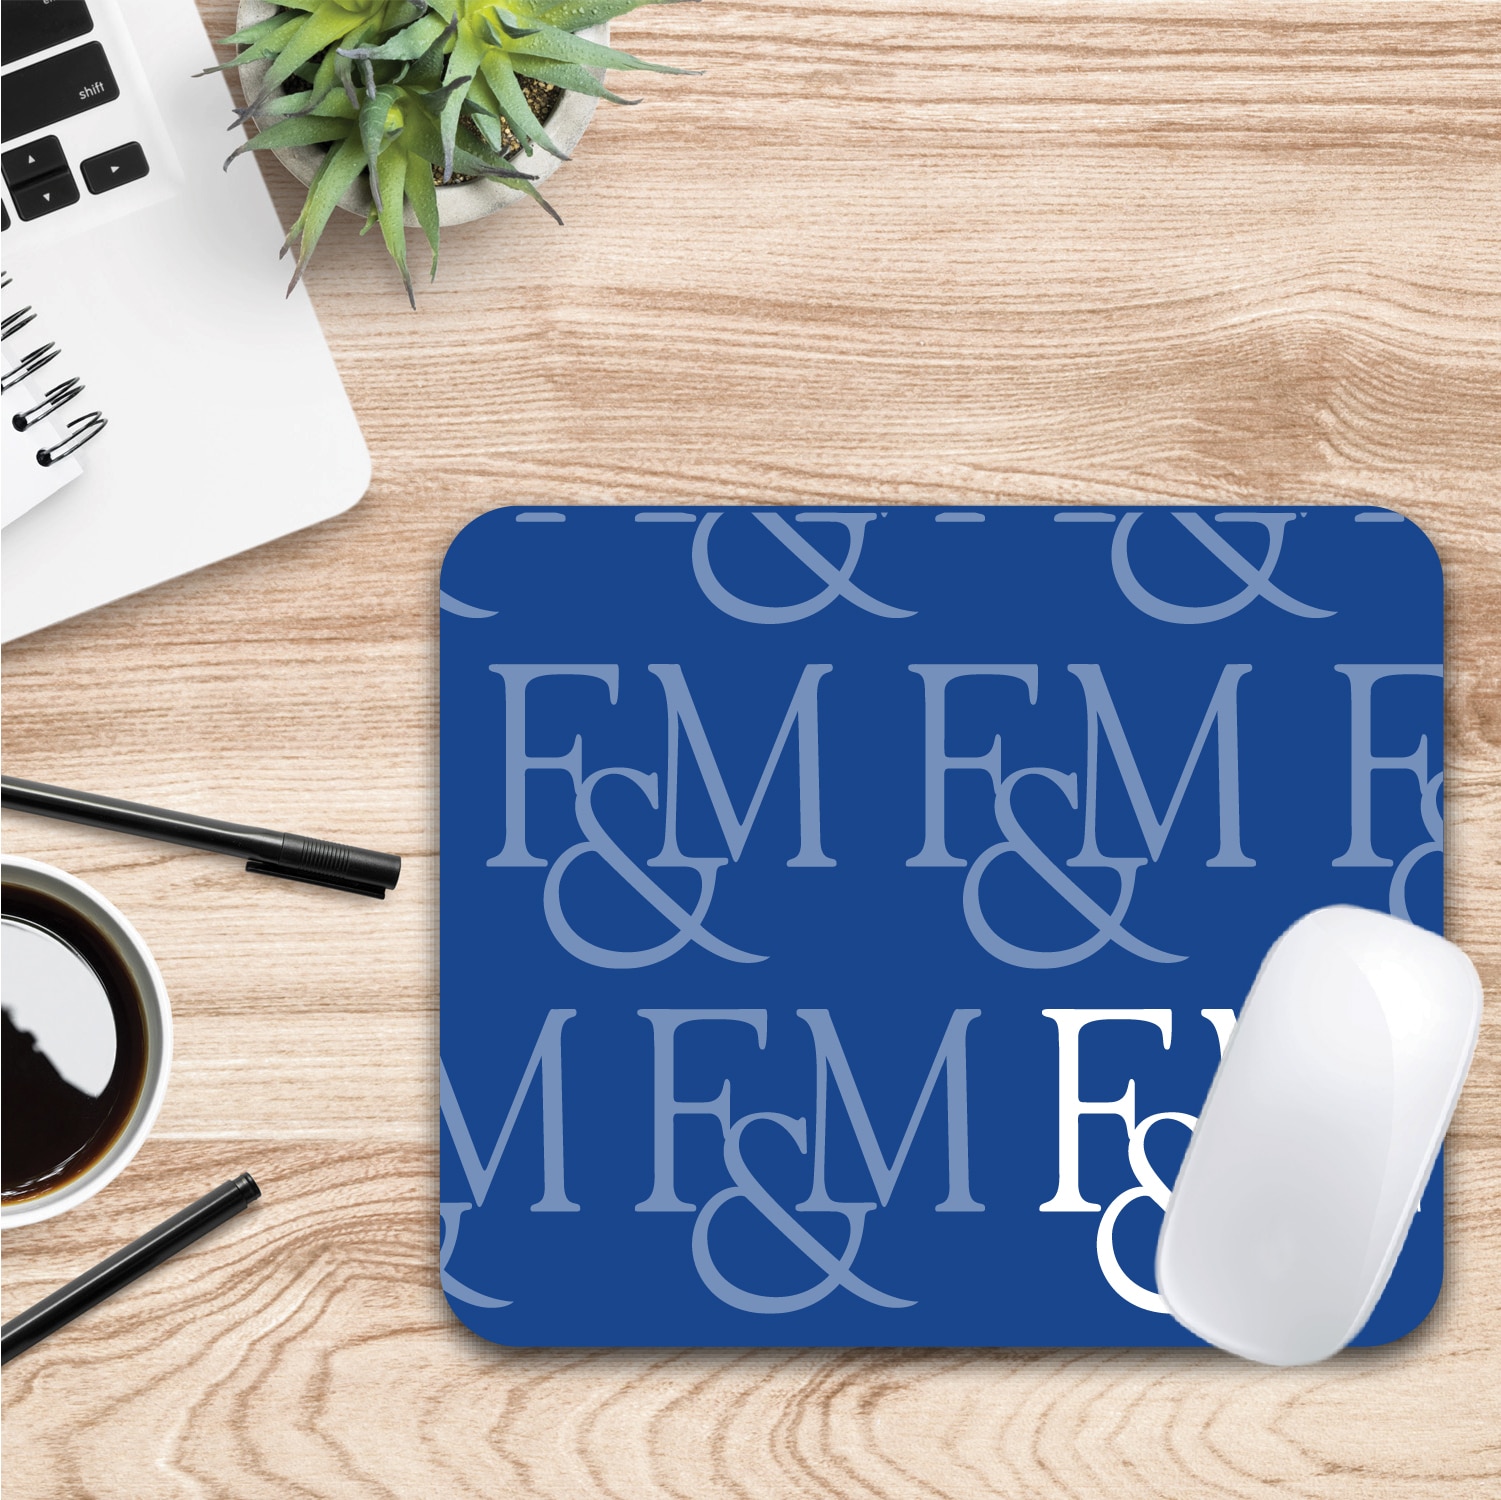 Franklin & Marshall College - Mousepad, Mascot Repeat V1